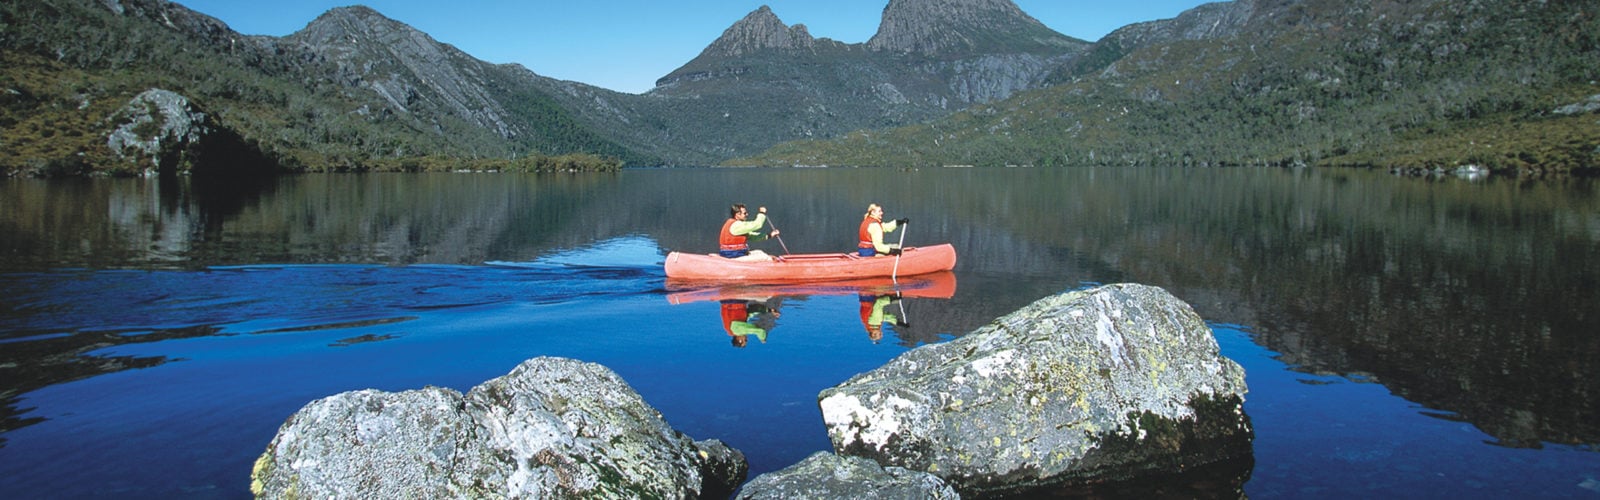 peppers-cradle-mountain-canoeing